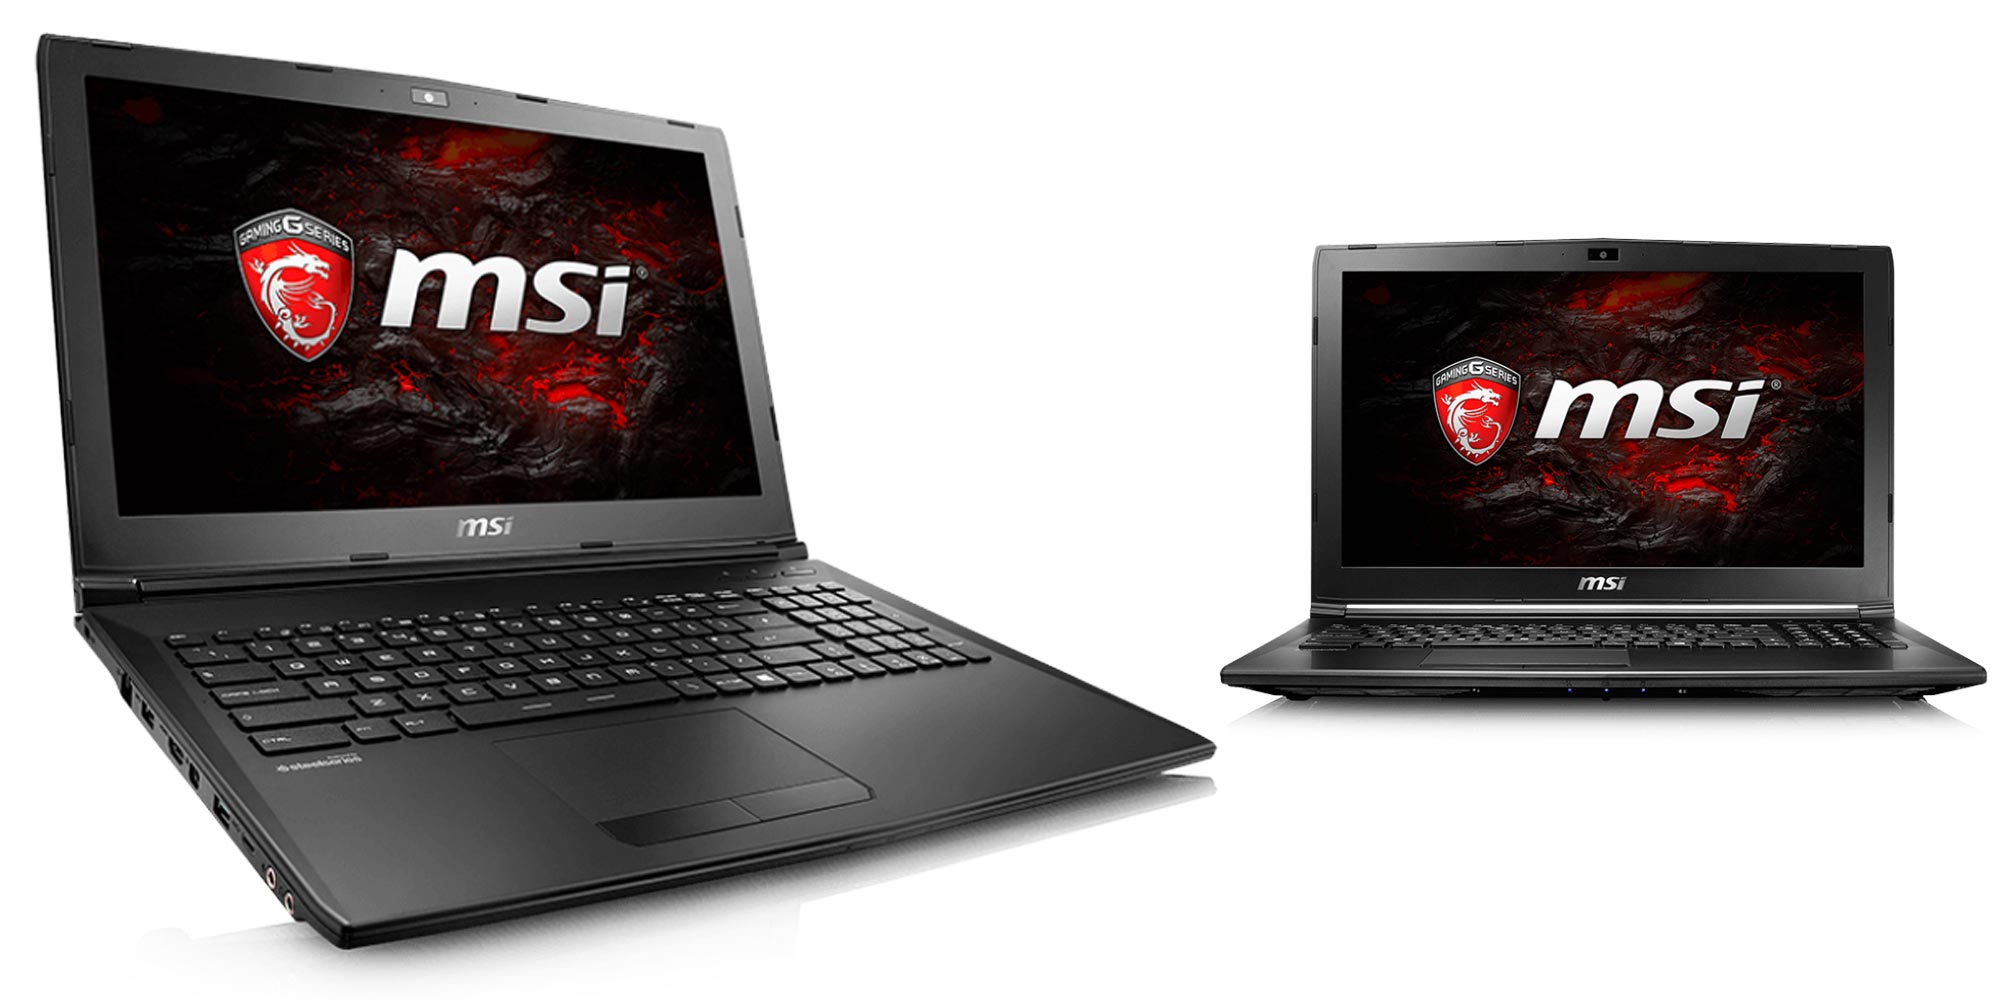 msi-s-gaming-laptop-has-an-i7-128gb-ssd-1tb-hdd-more-780-or-680-w